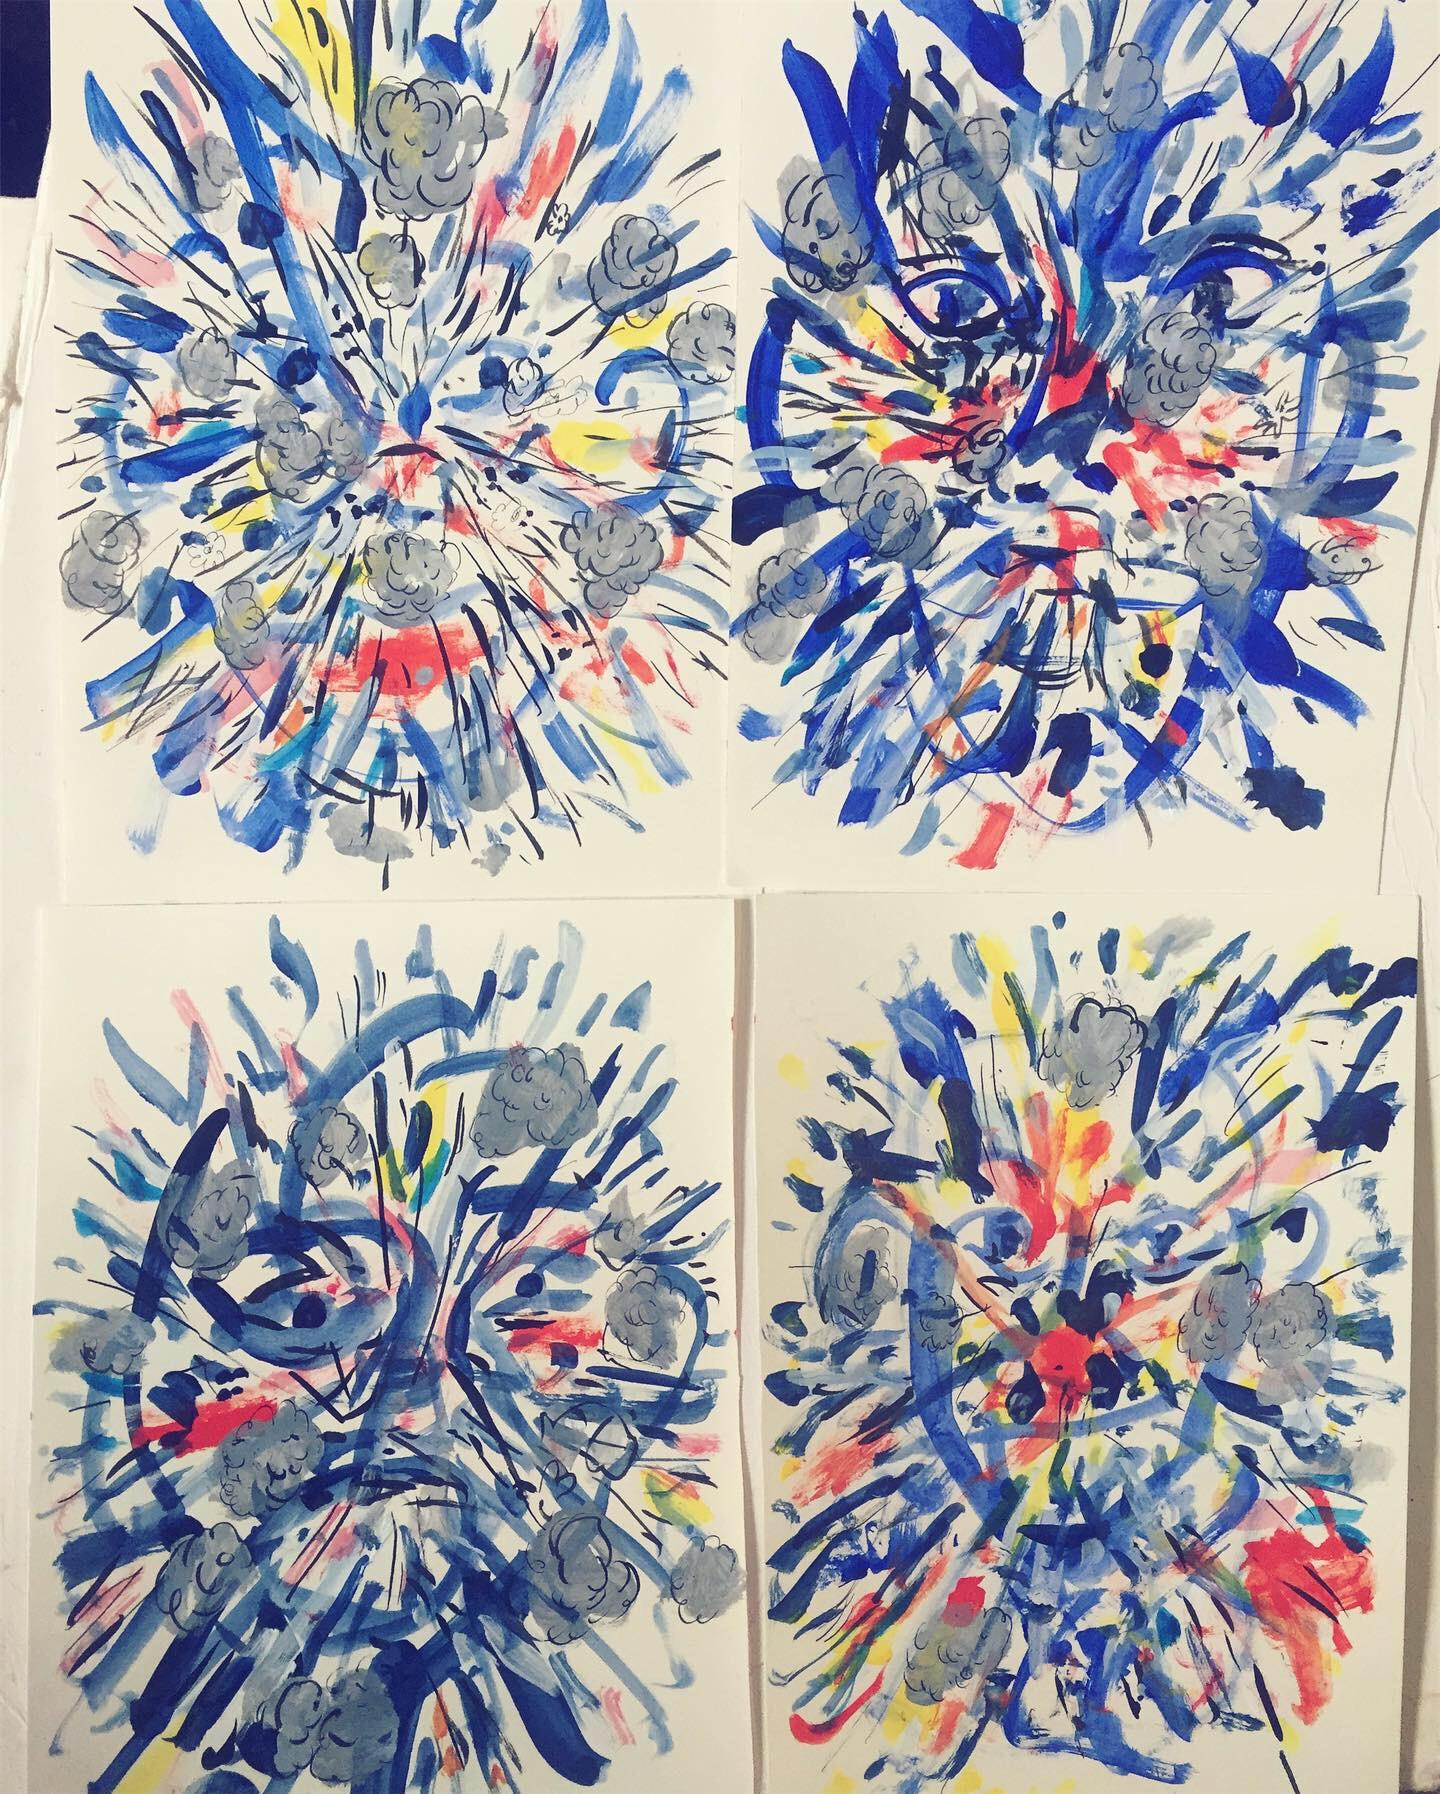 Nina Bovasso Portrait - Suite of four works on paper "Exploding Faces"